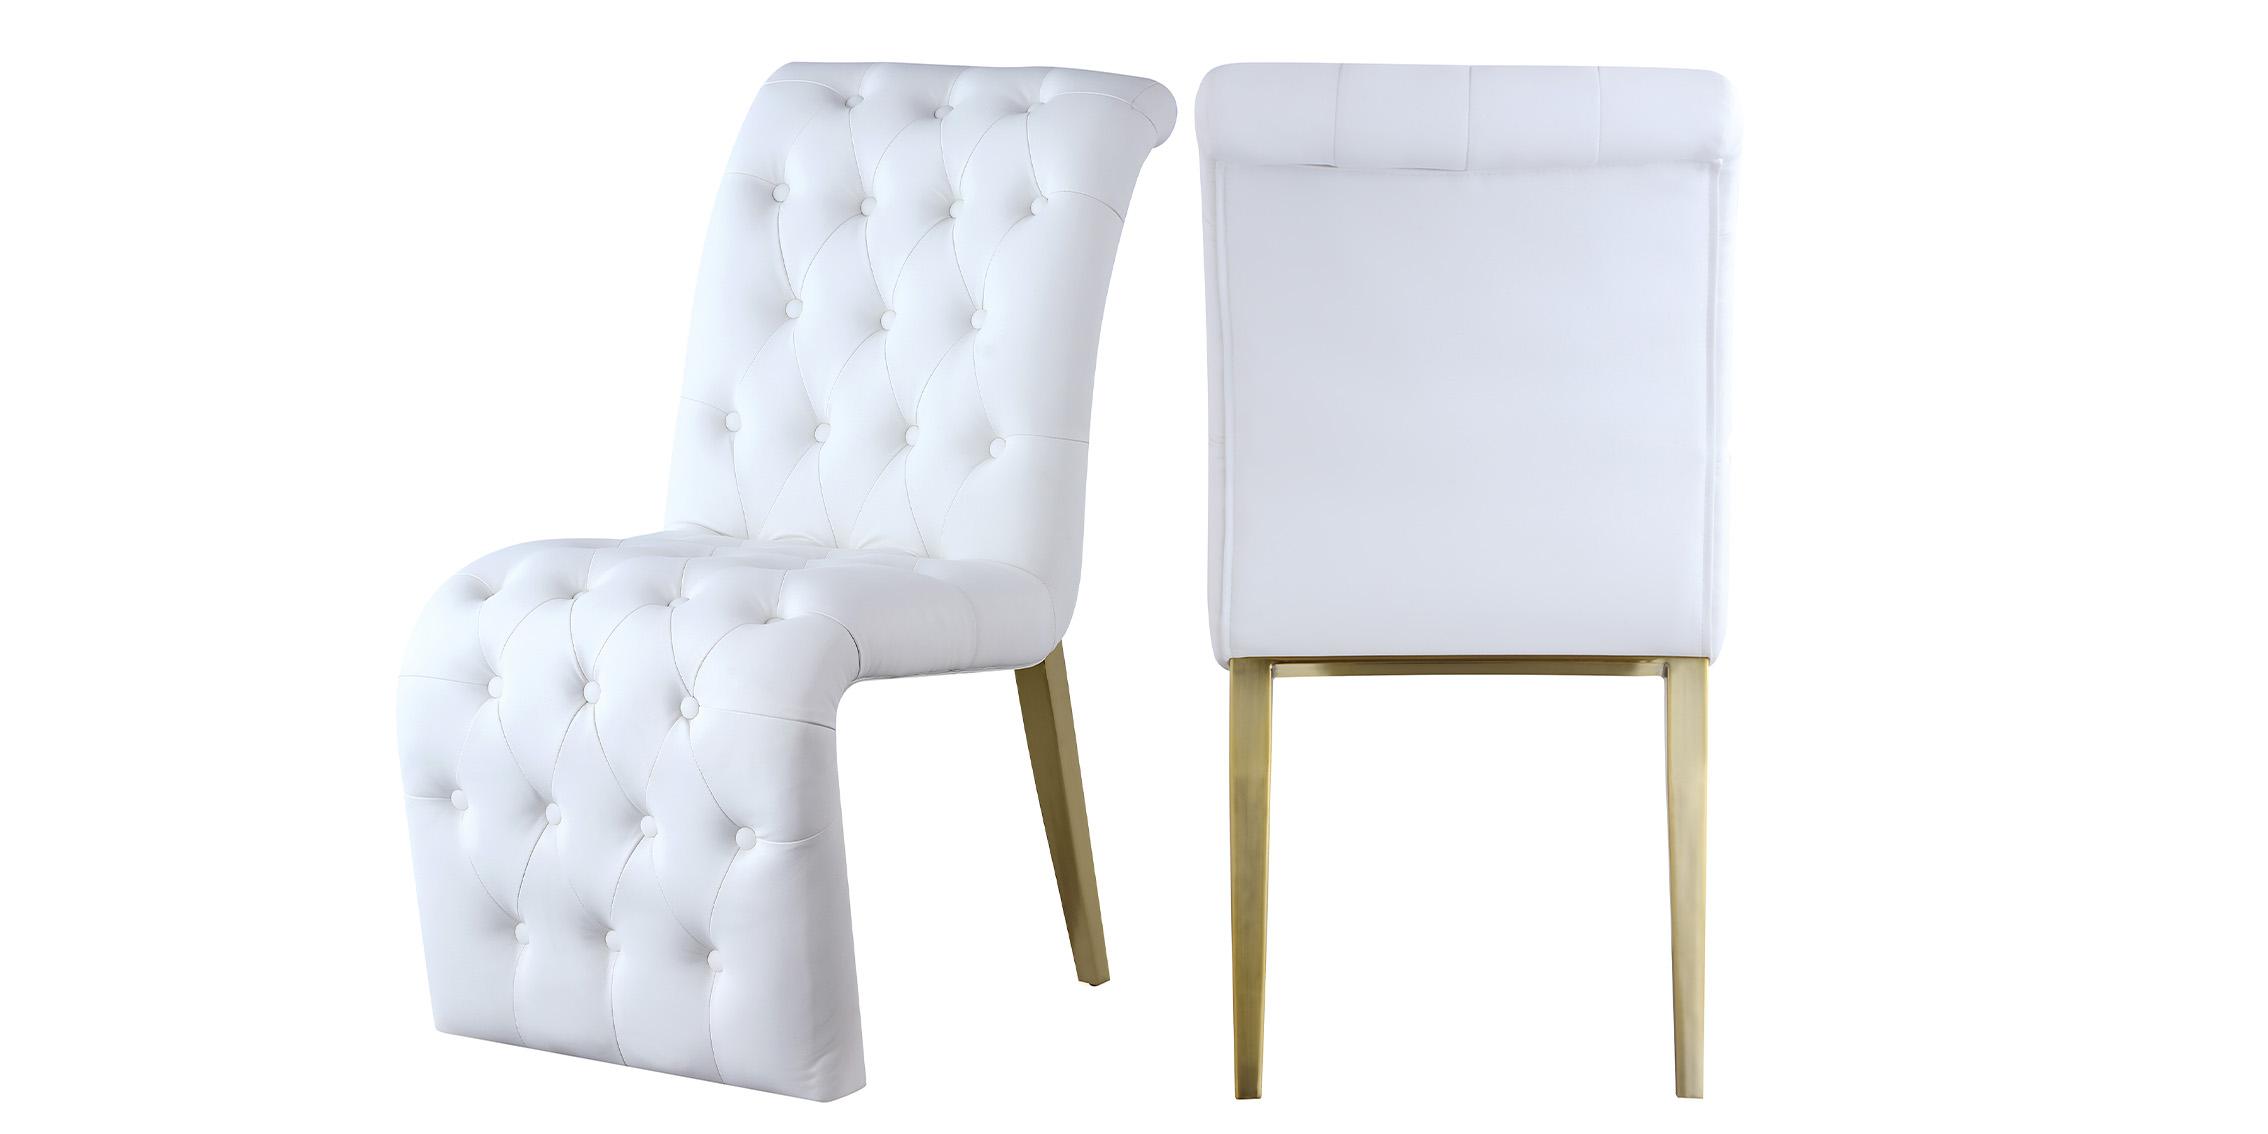 Contemporary, Modern Dining Chair Set CURVE 920White-C 920White-C in White, Gold Faux Leather